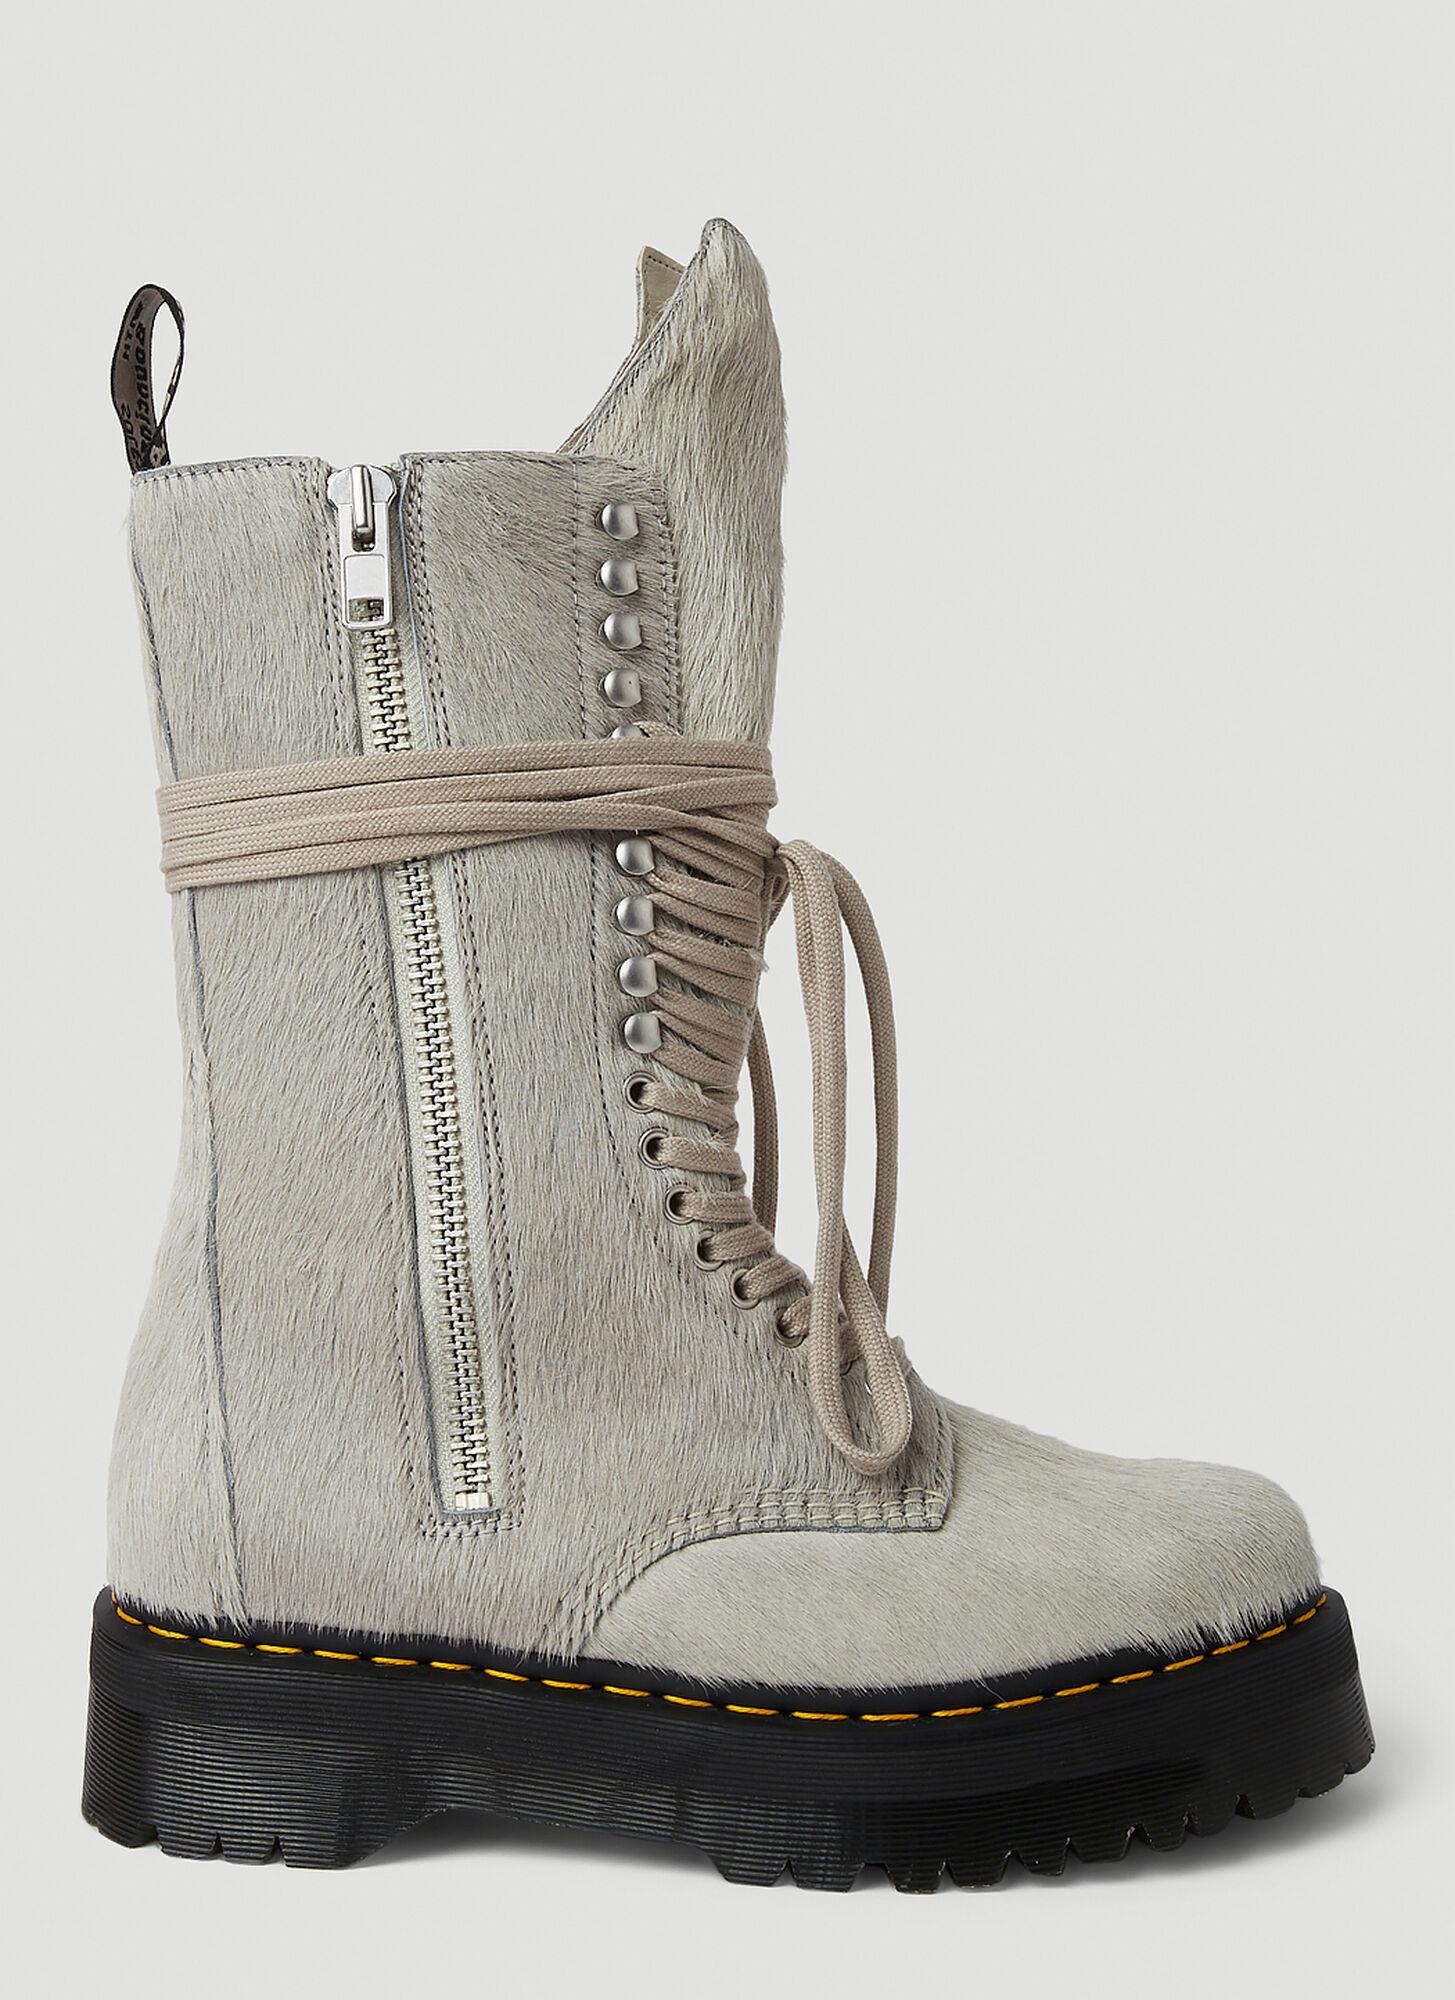 Rick Owens X Dr. Martens Quad Sole Boots in Gray for Men | Lyst